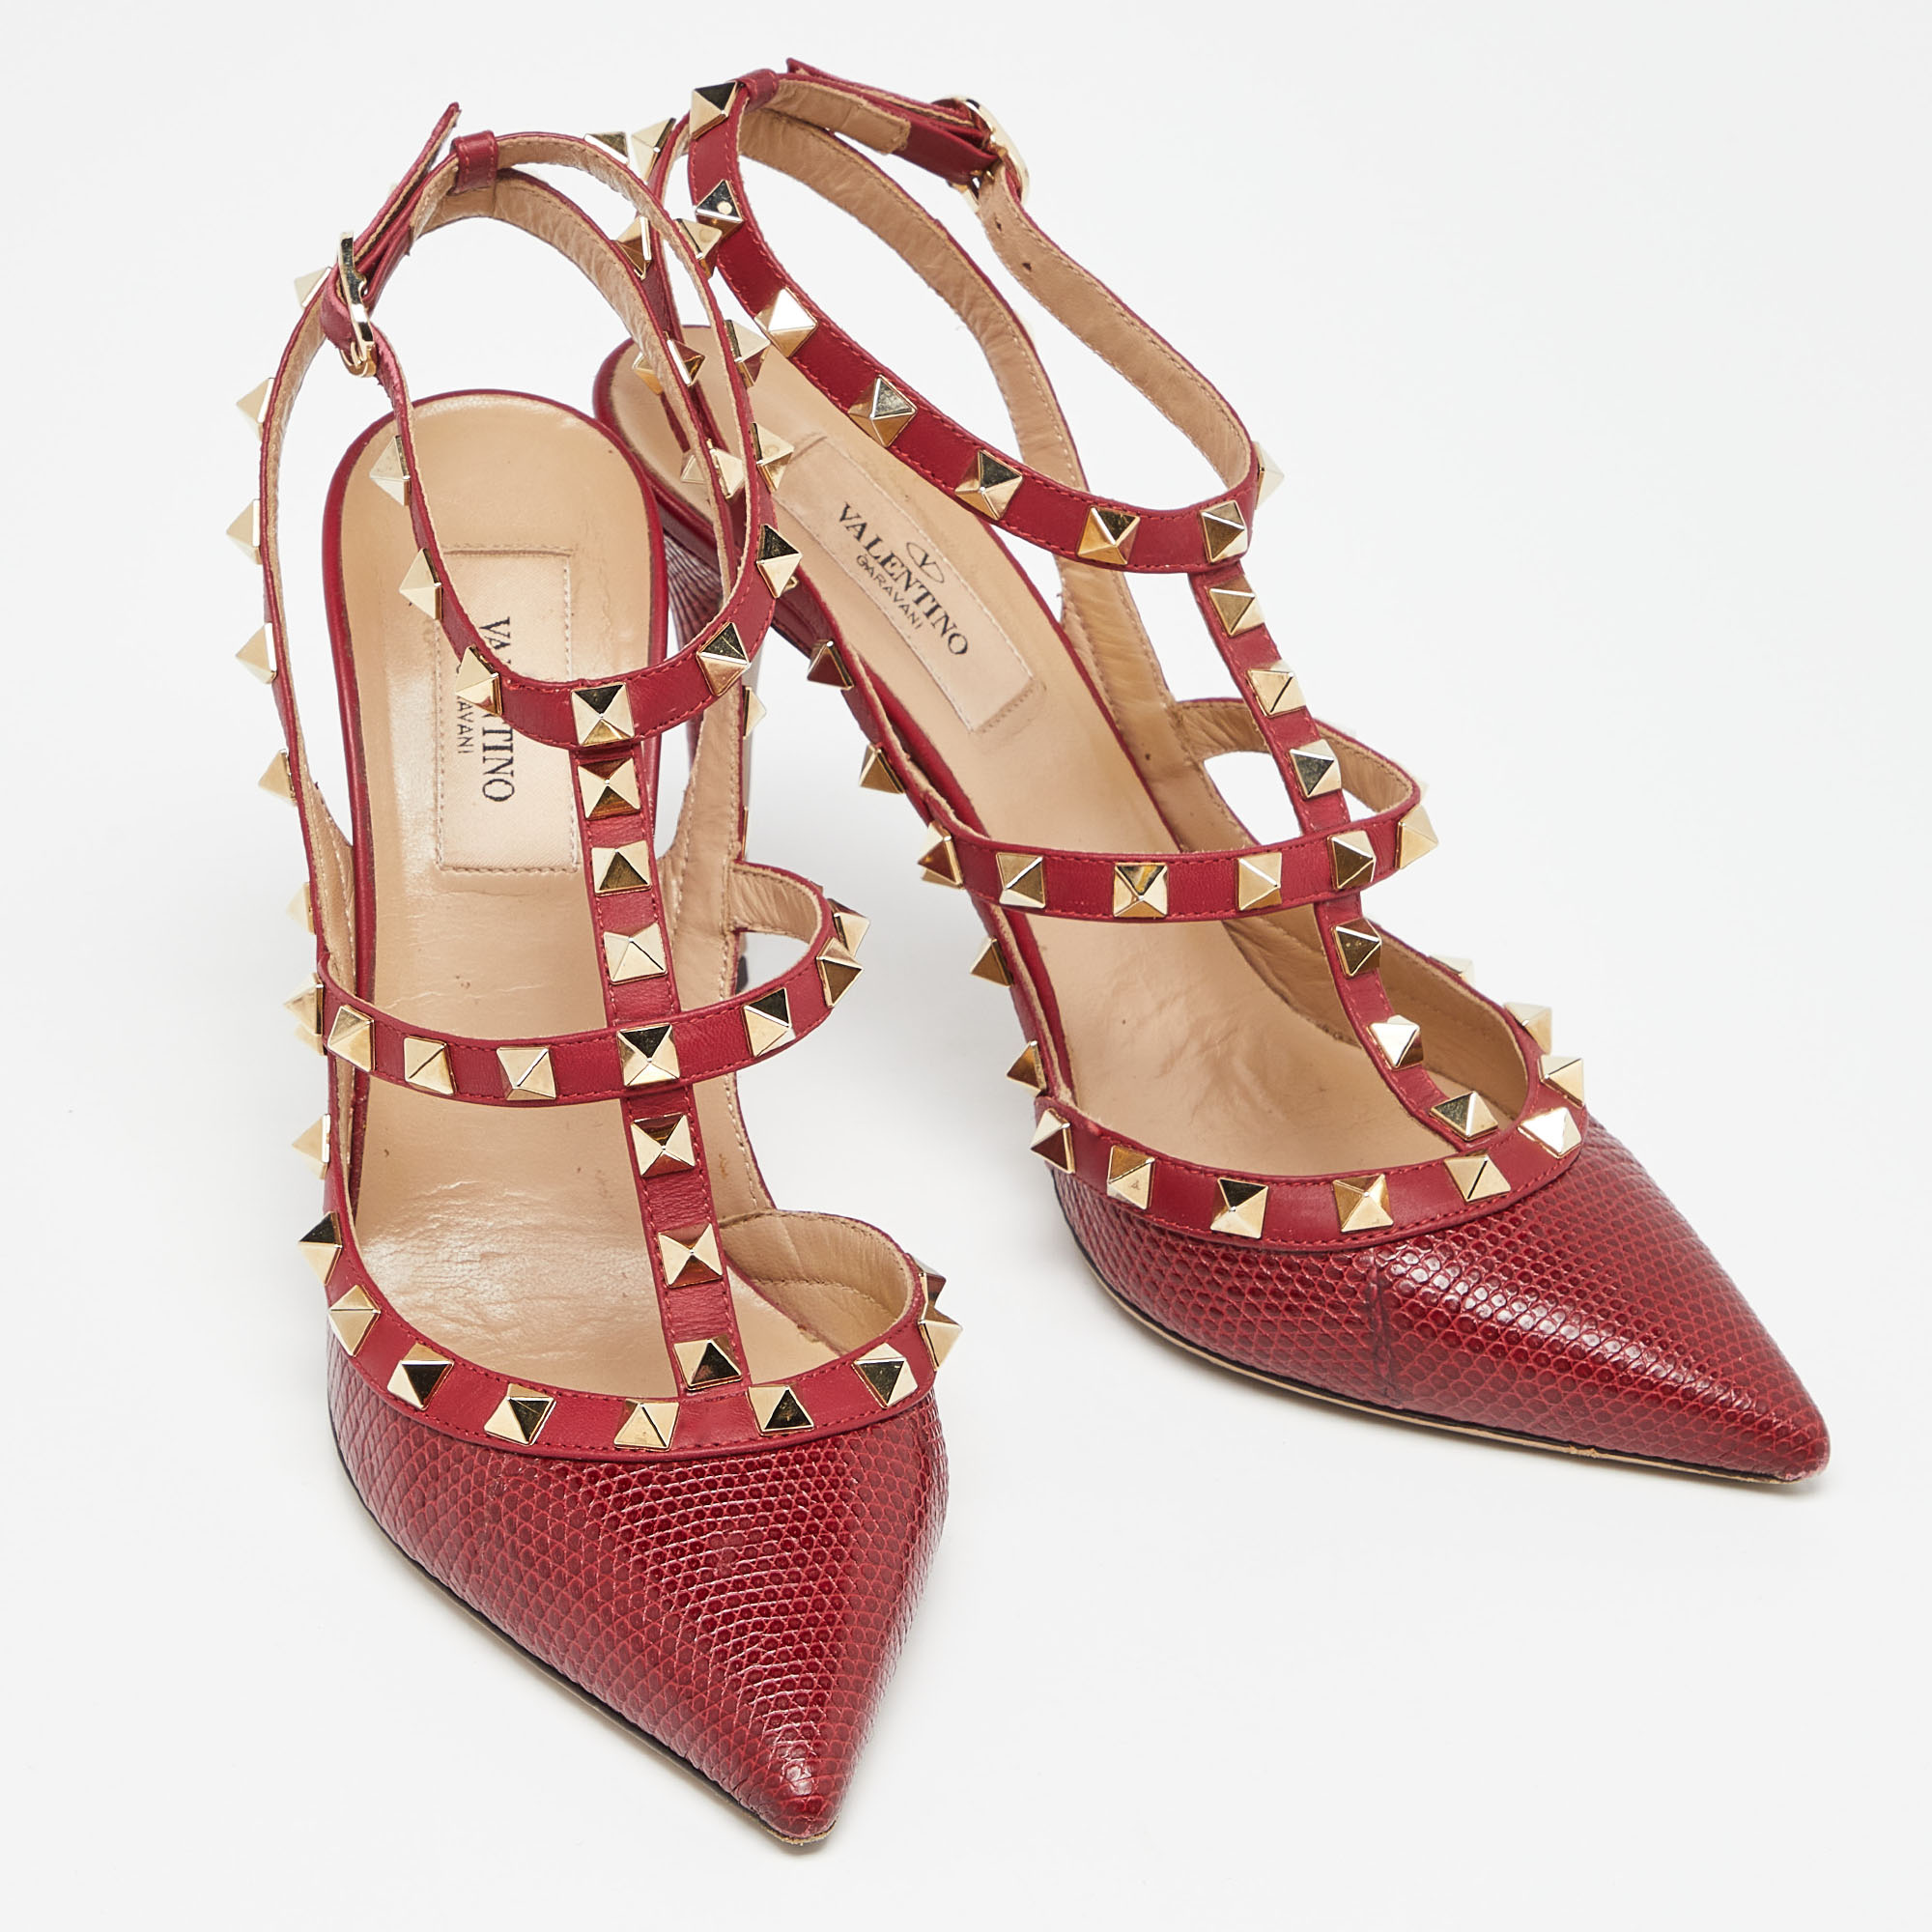 Valentino Red Lizard And Leather Rockstud Pumps Size 37.5